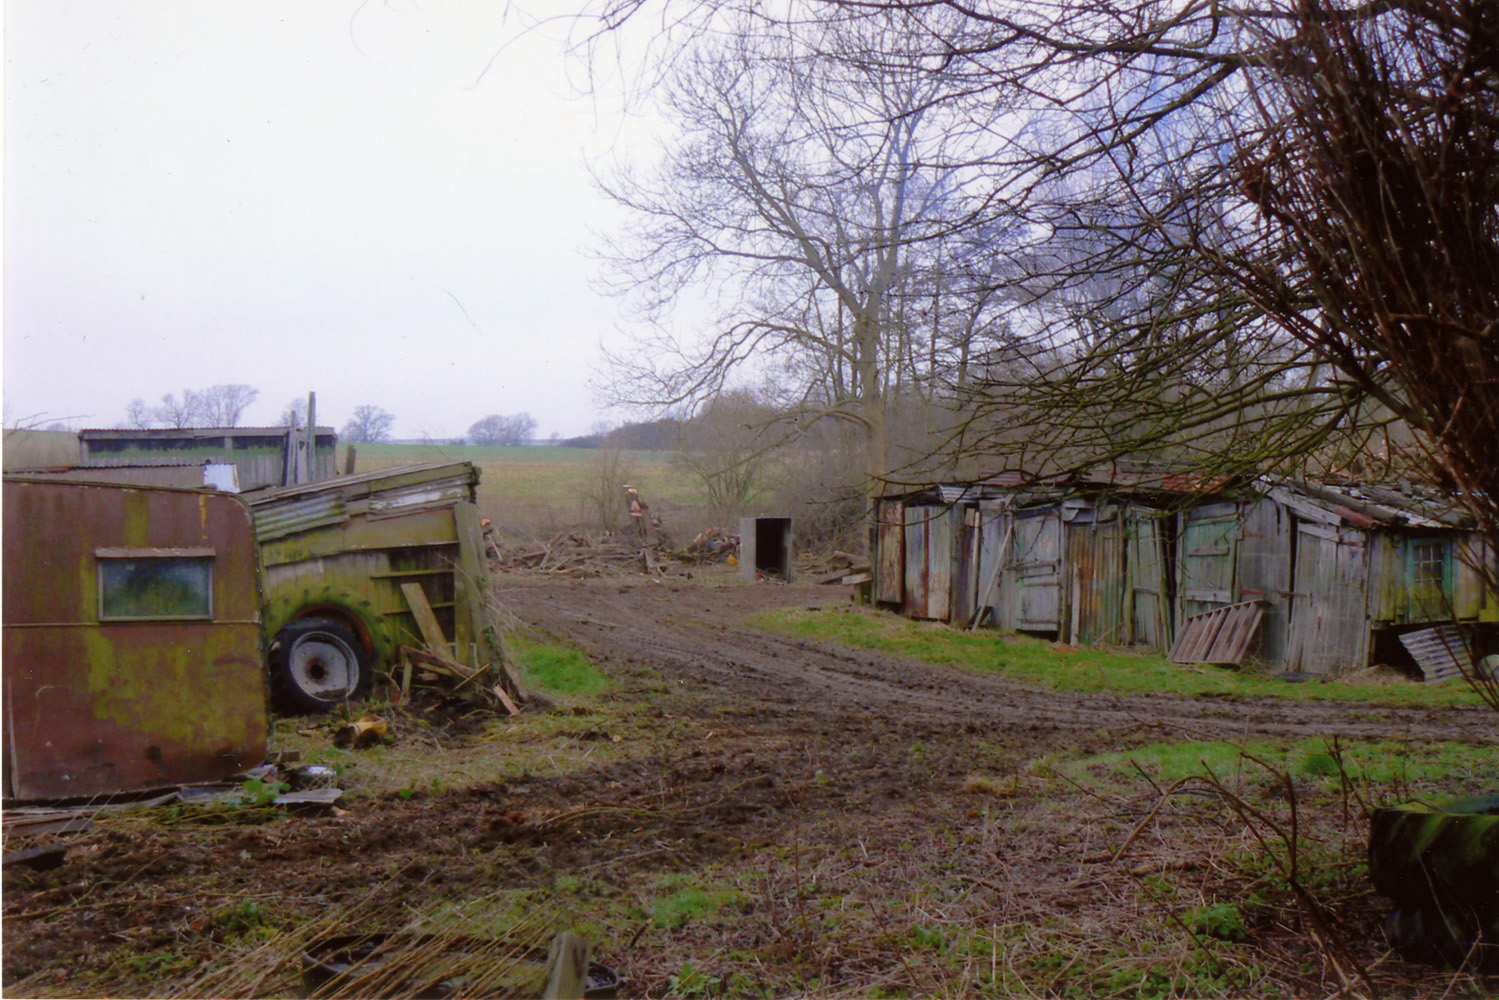 The sheds at the Lock House, after the ground clearance